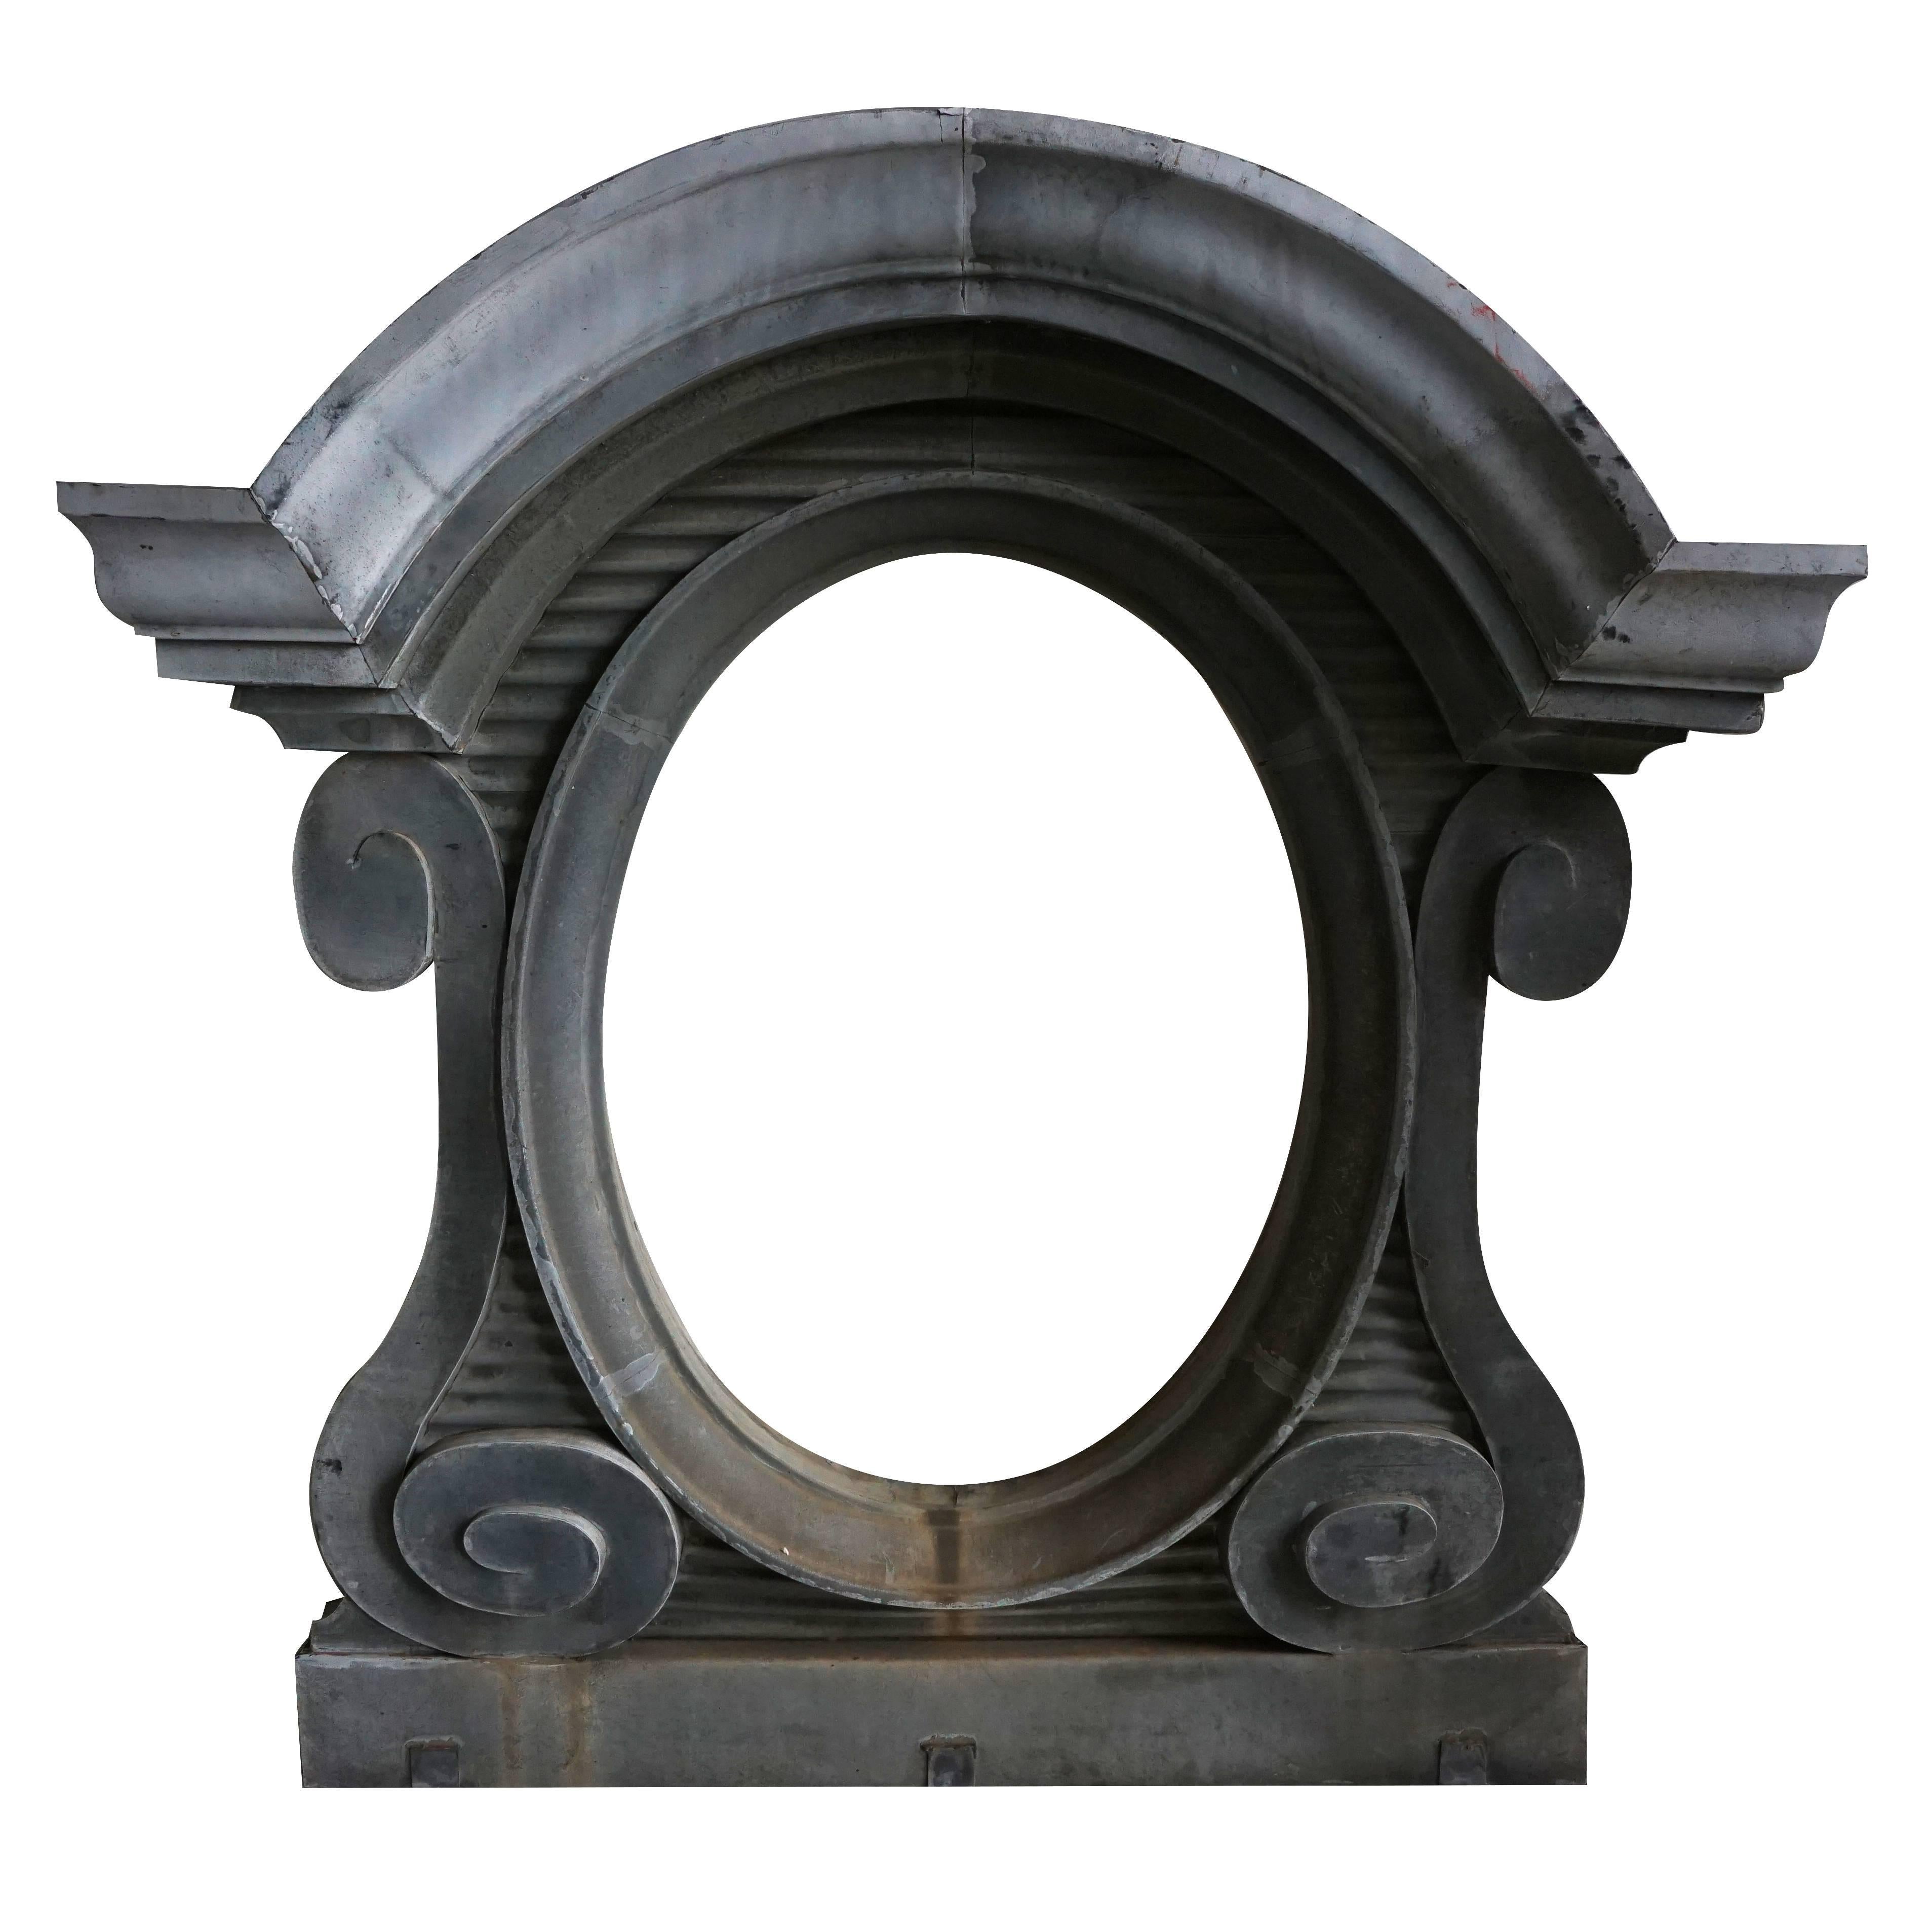 Late 19th century, a set of three French zinc window surrounds with recently added antiqued mirror glass from a Palais in Nantes, France, circa 1880 Nantes, France.